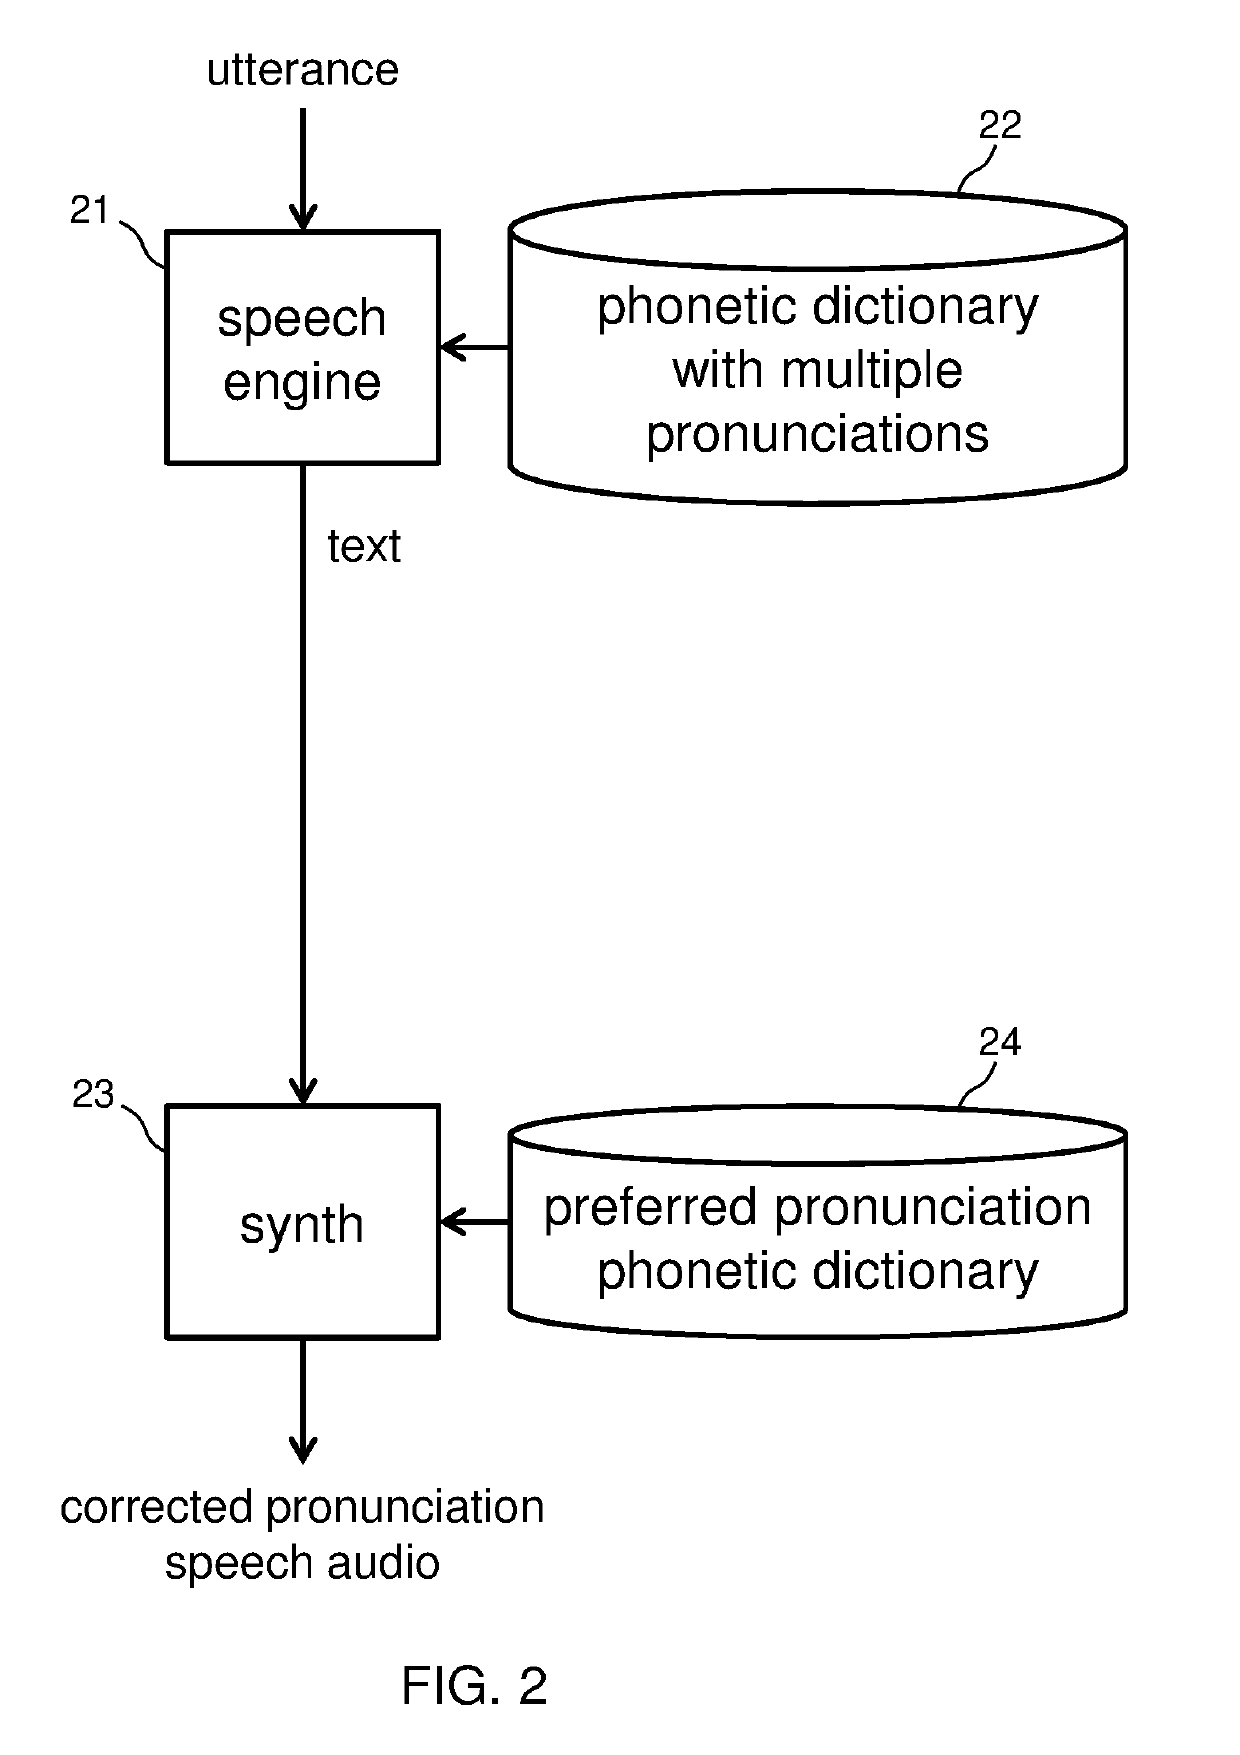 Pronunciation guided by automatic speech recognition